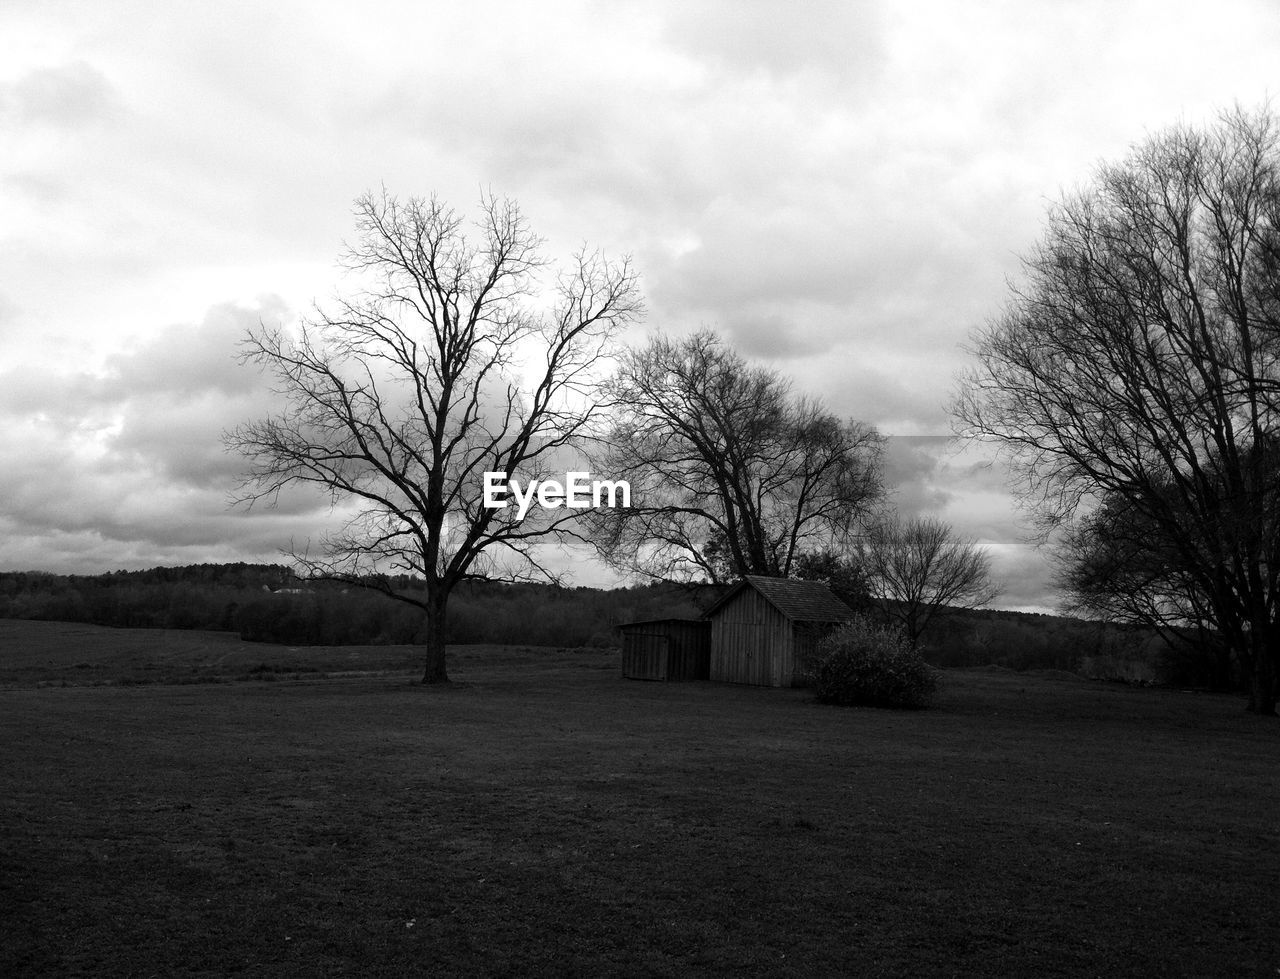 BARE TREES ON LANDSCAPE AGAINST CLOUDY SKY